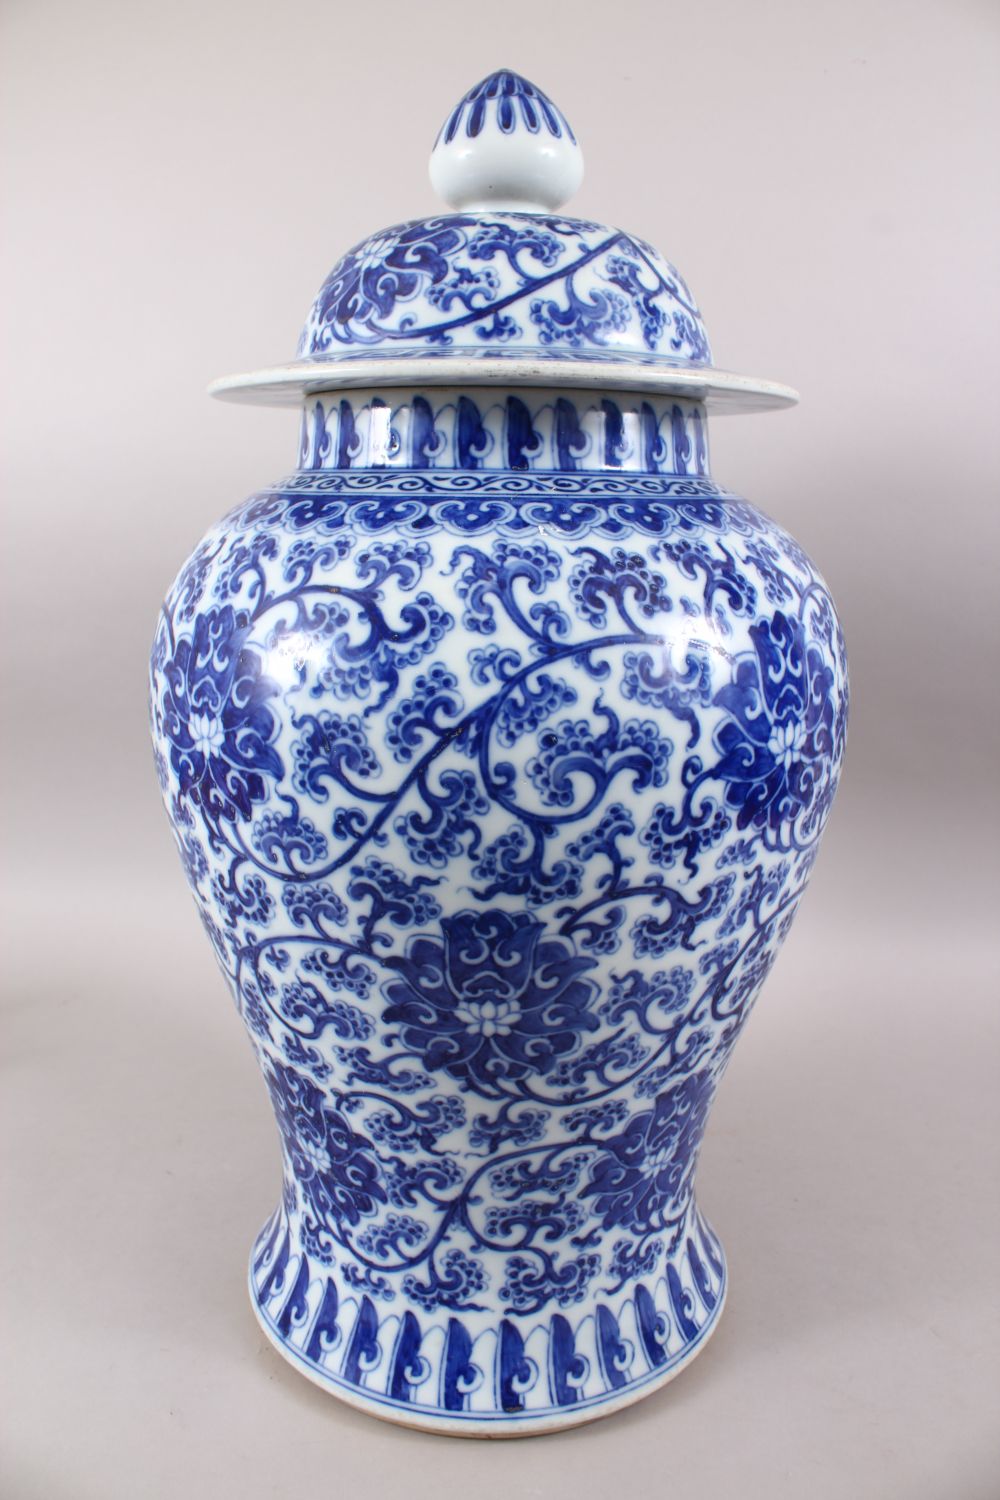 A LARGE CHINESE BLUE & WHITE PORCELAIN LIDDED JAR, the body decorated with scenes of formal - Image 3 of 8